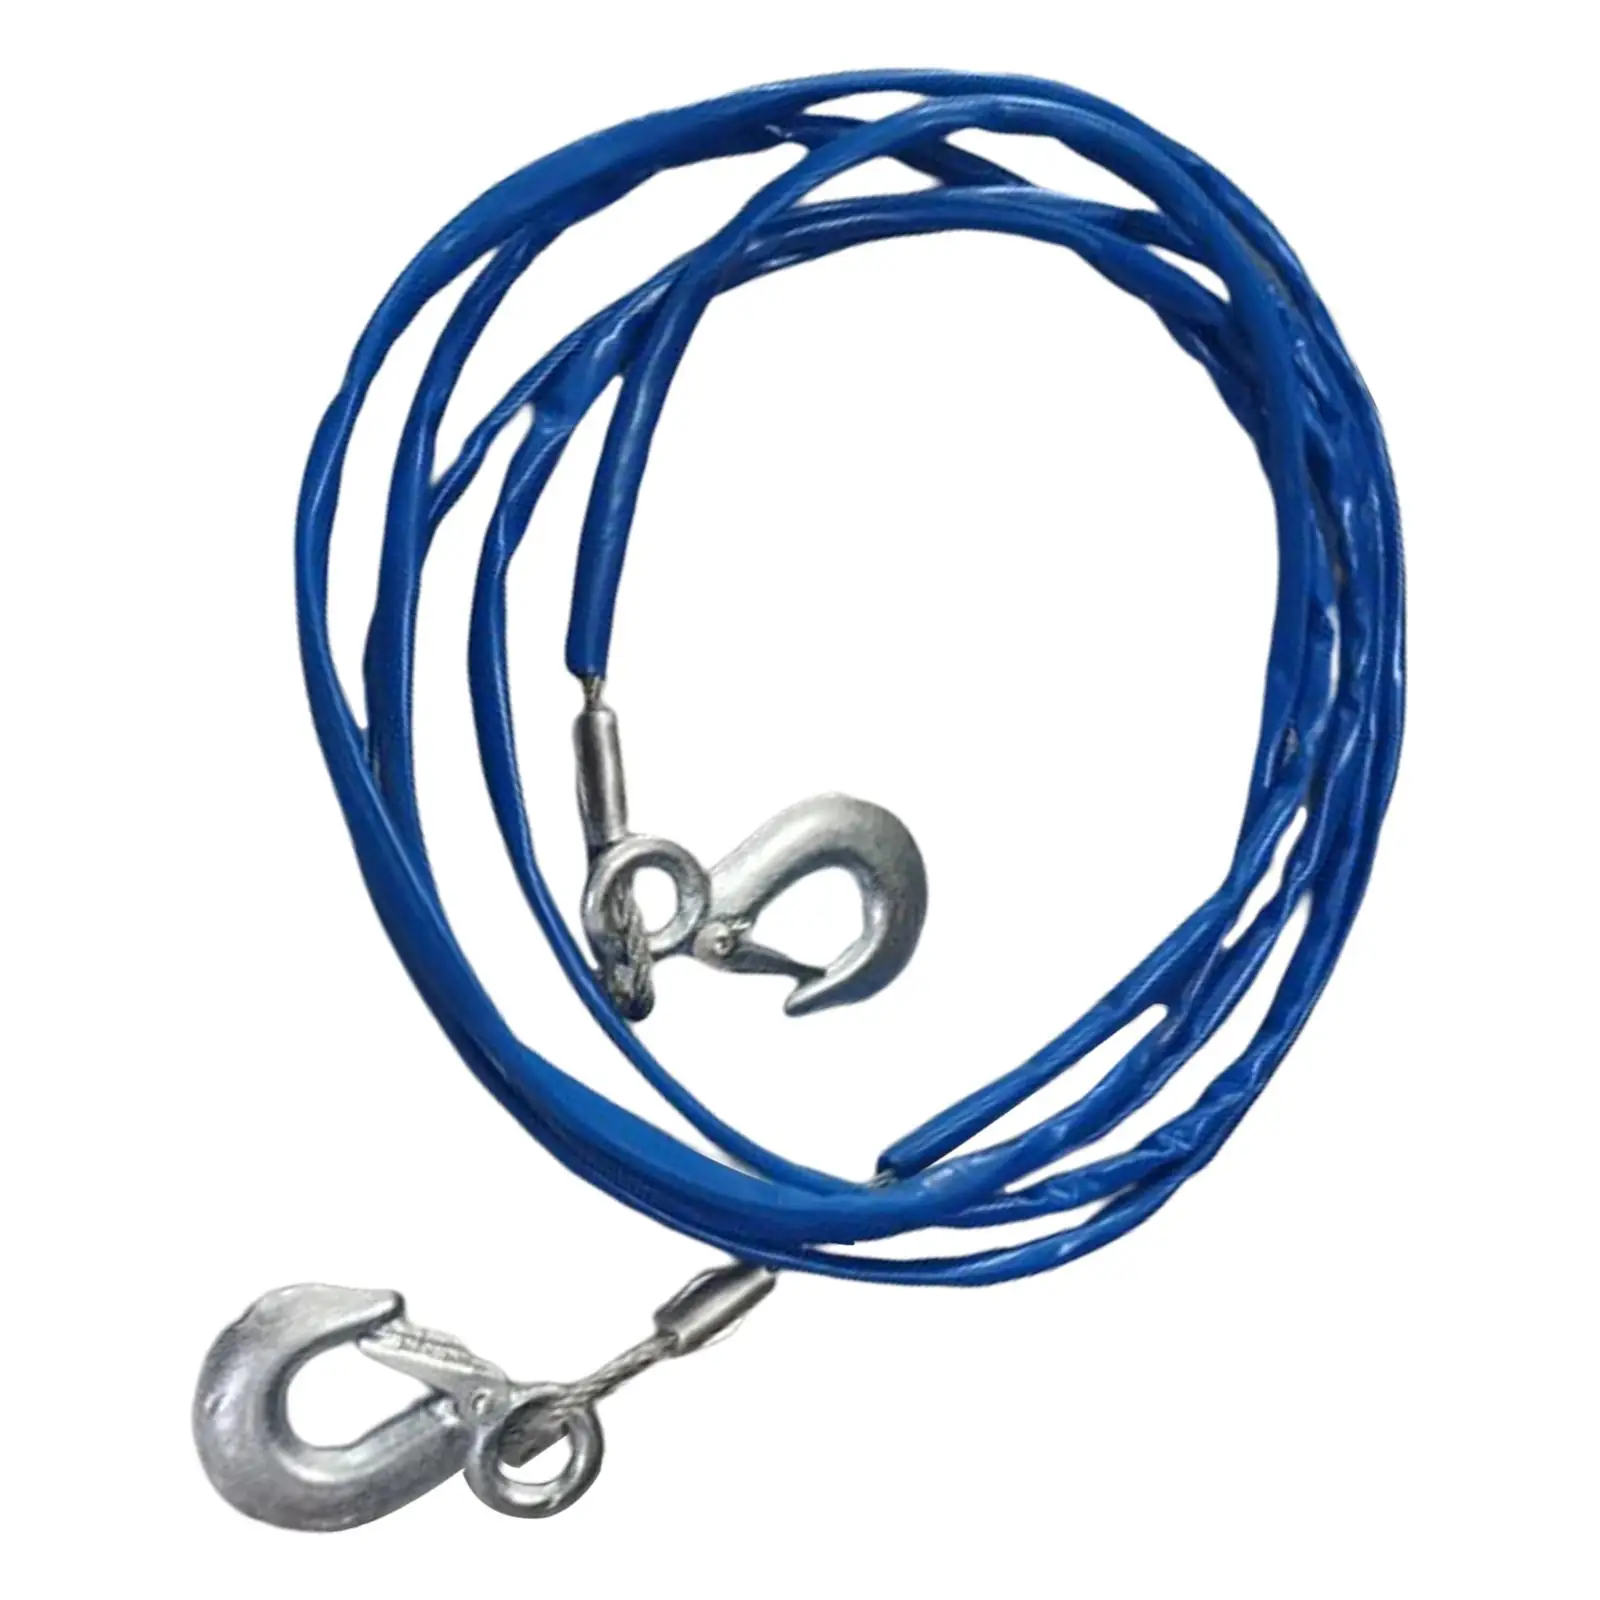 5Tons Blue Rubber Coated Steel Wire for ATV Boat Truck Towing Recover Use